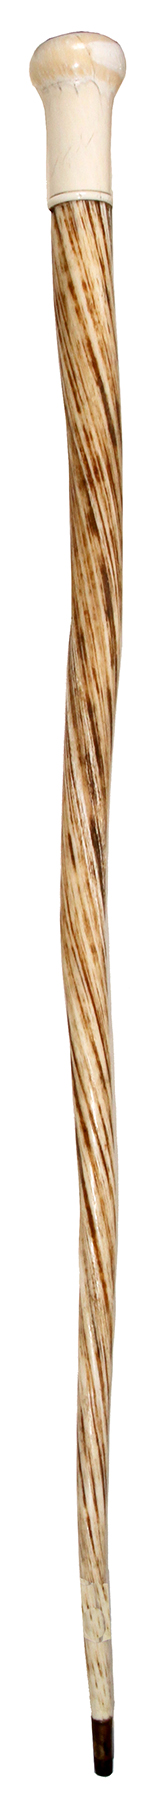 Henry Marder Estate Cane Absolute Auction - 25.jpg